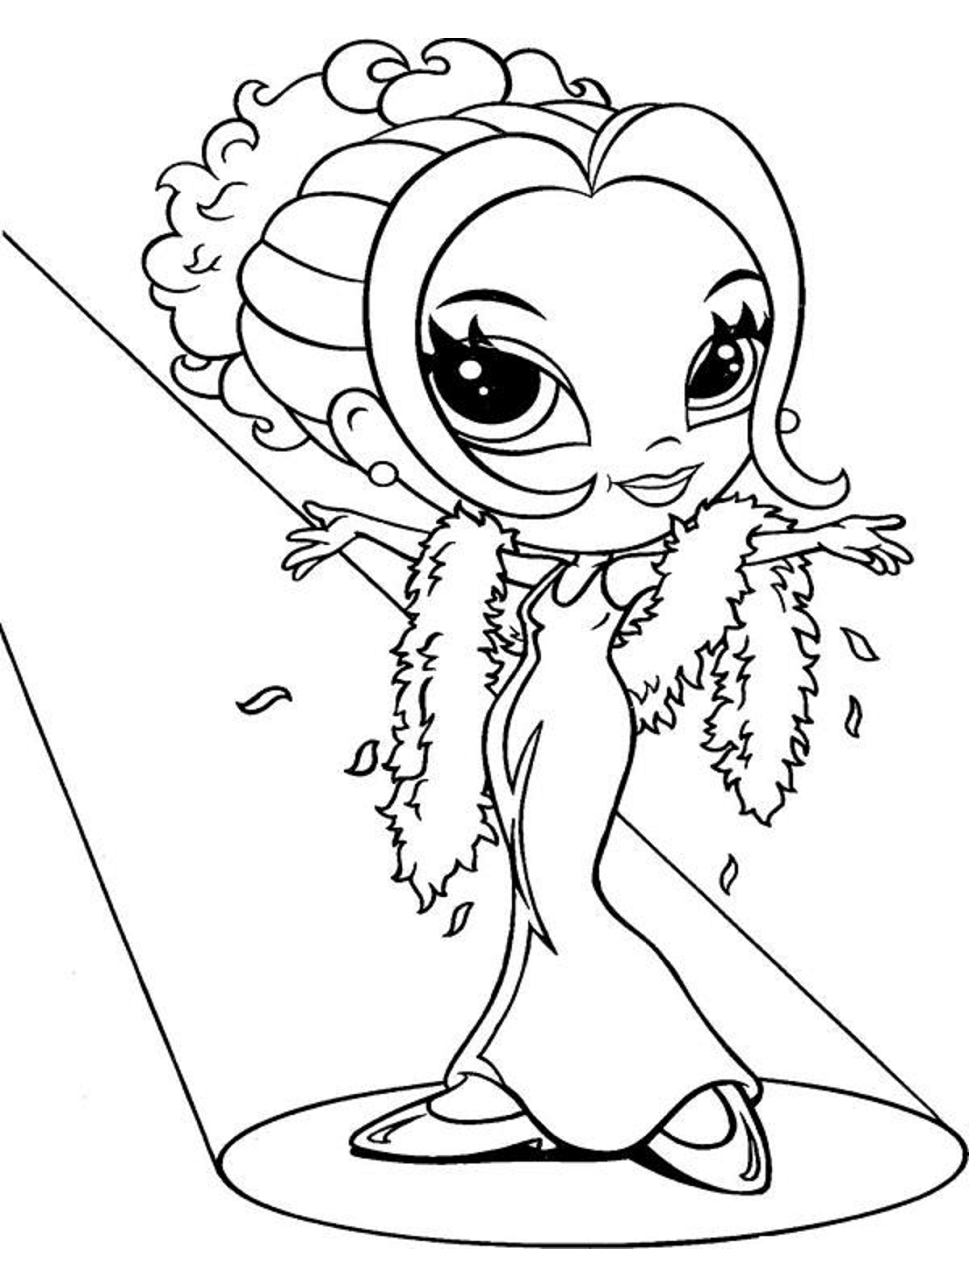 Beautiful Glamour Girl Coloring Page - Free Printable Coloring Pages